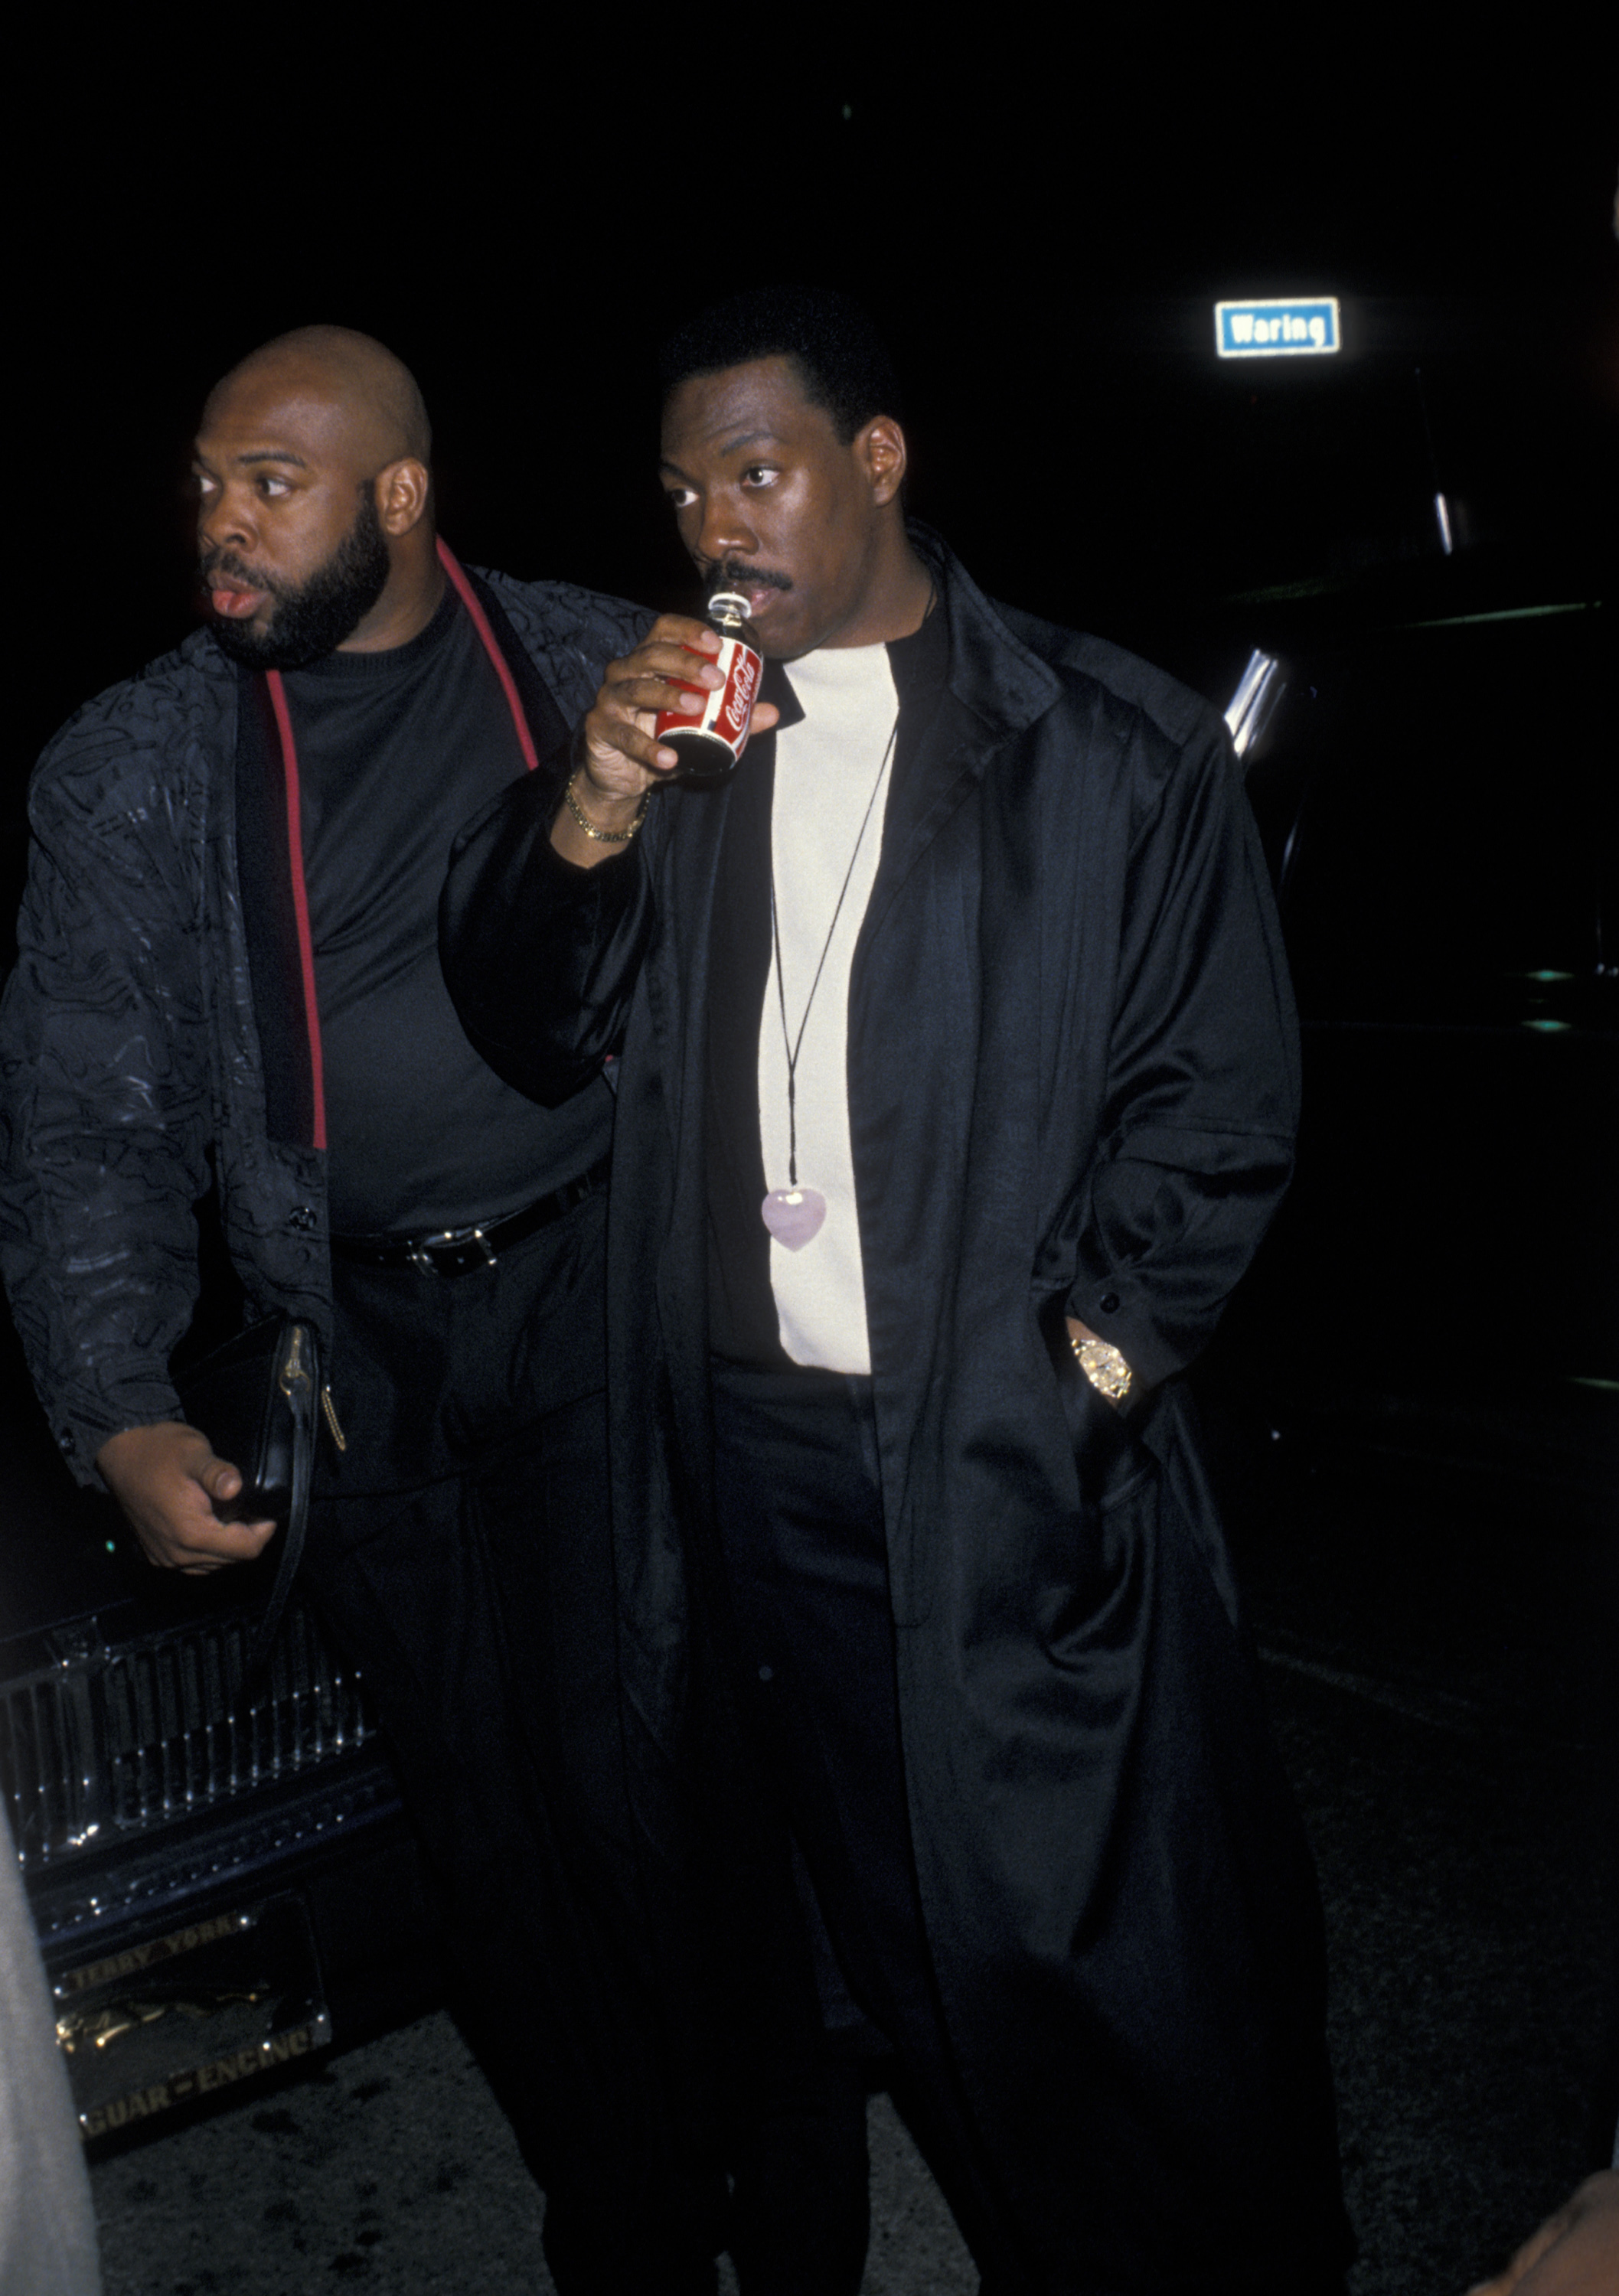 Eddie Murphy and Spike Lee in Conversation: Our 1990 Cover Story